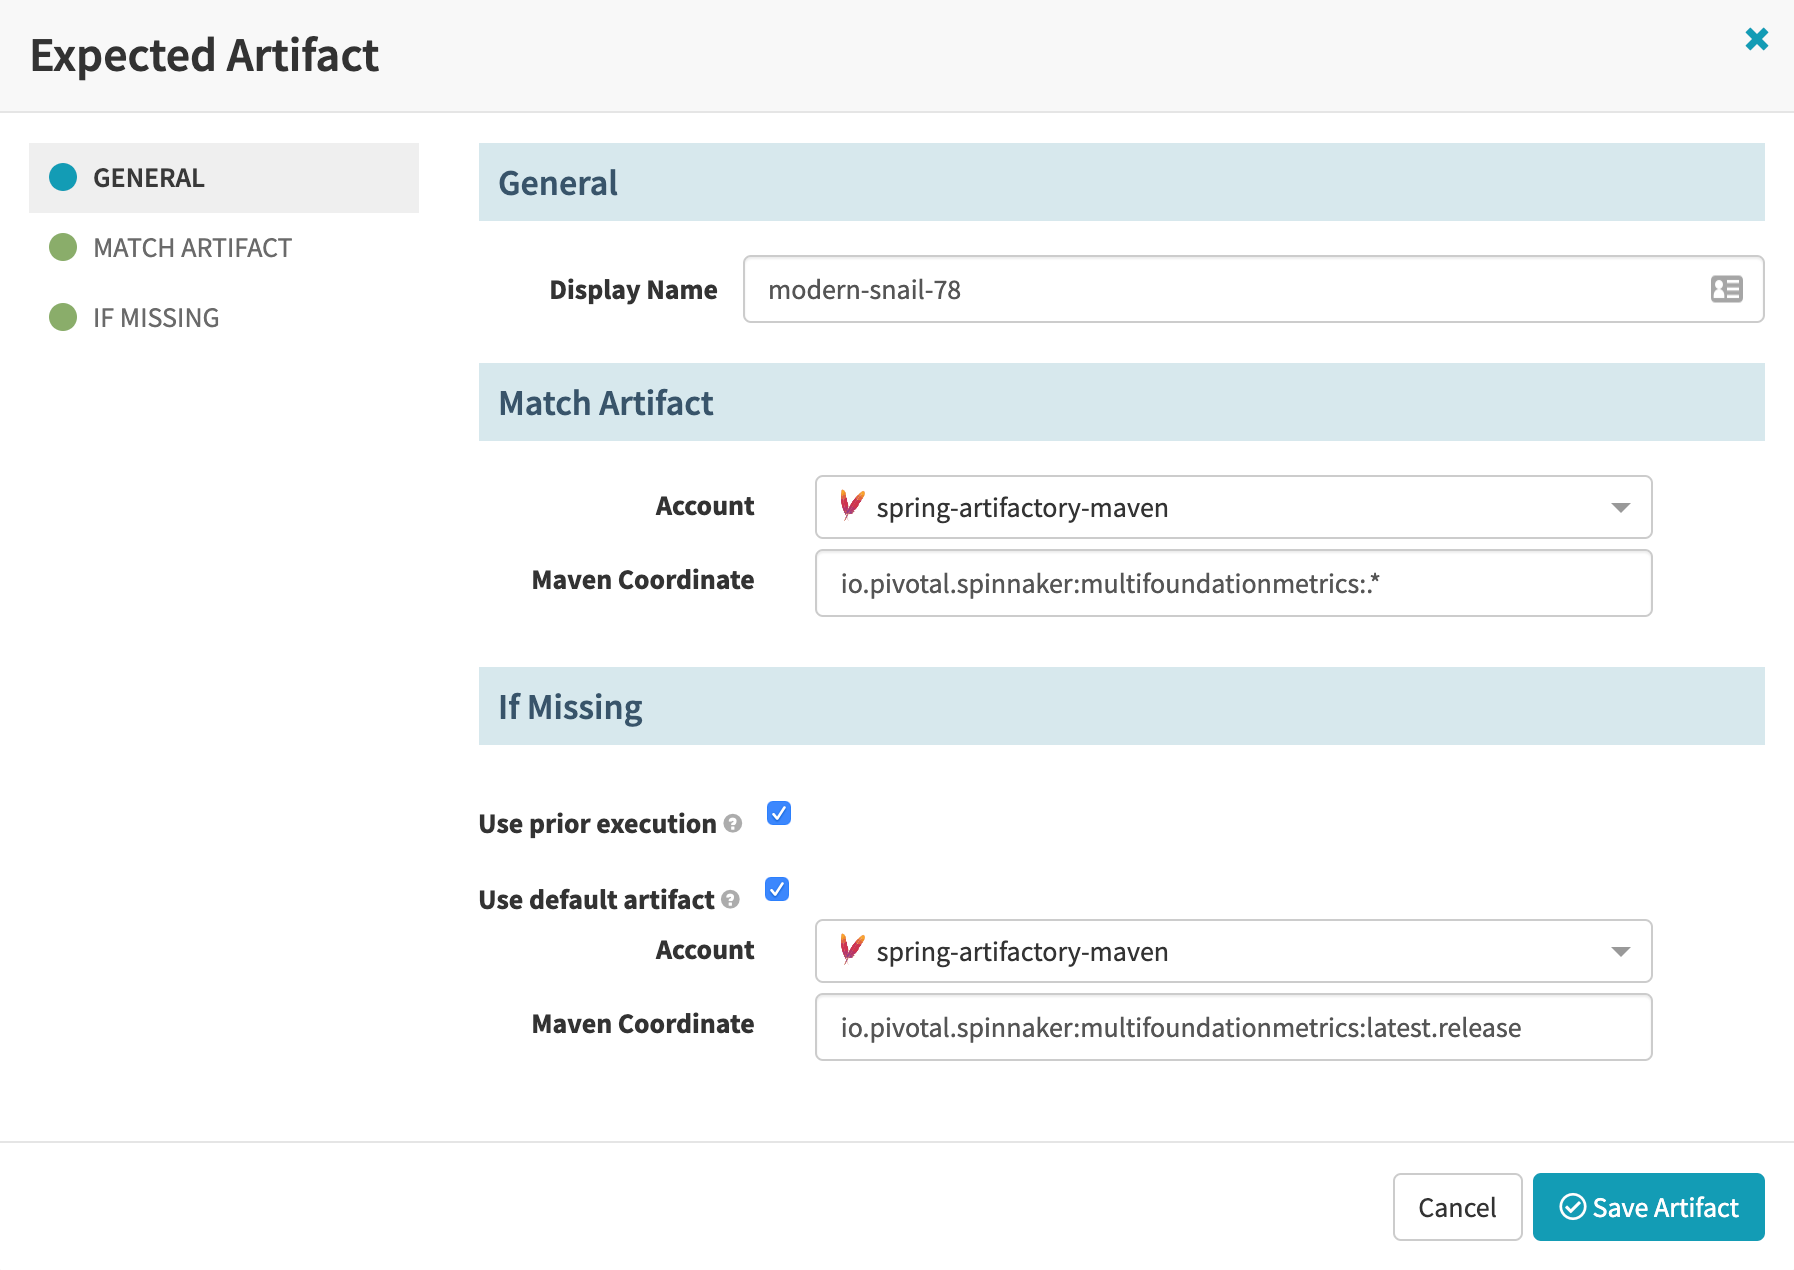 Configuring Maven artifact fields in a pipeline trigger&rsquo;s expected artifact settings.